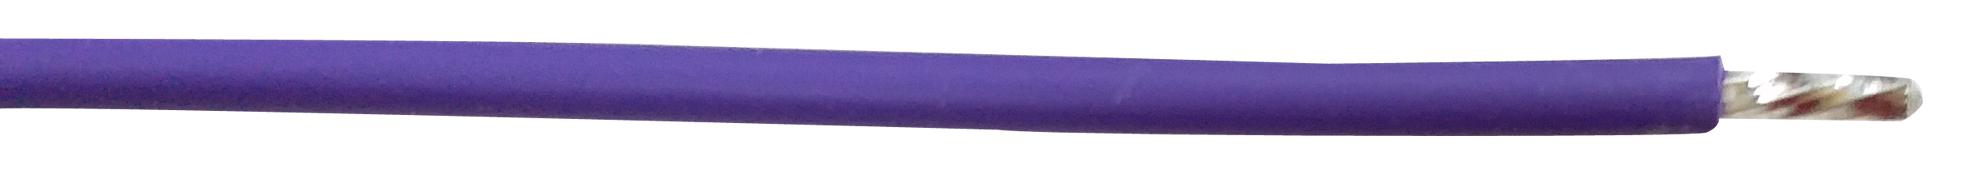 PP002580 CABLE WIRE, 20AWG, PURPLE, 305M PRO POWER